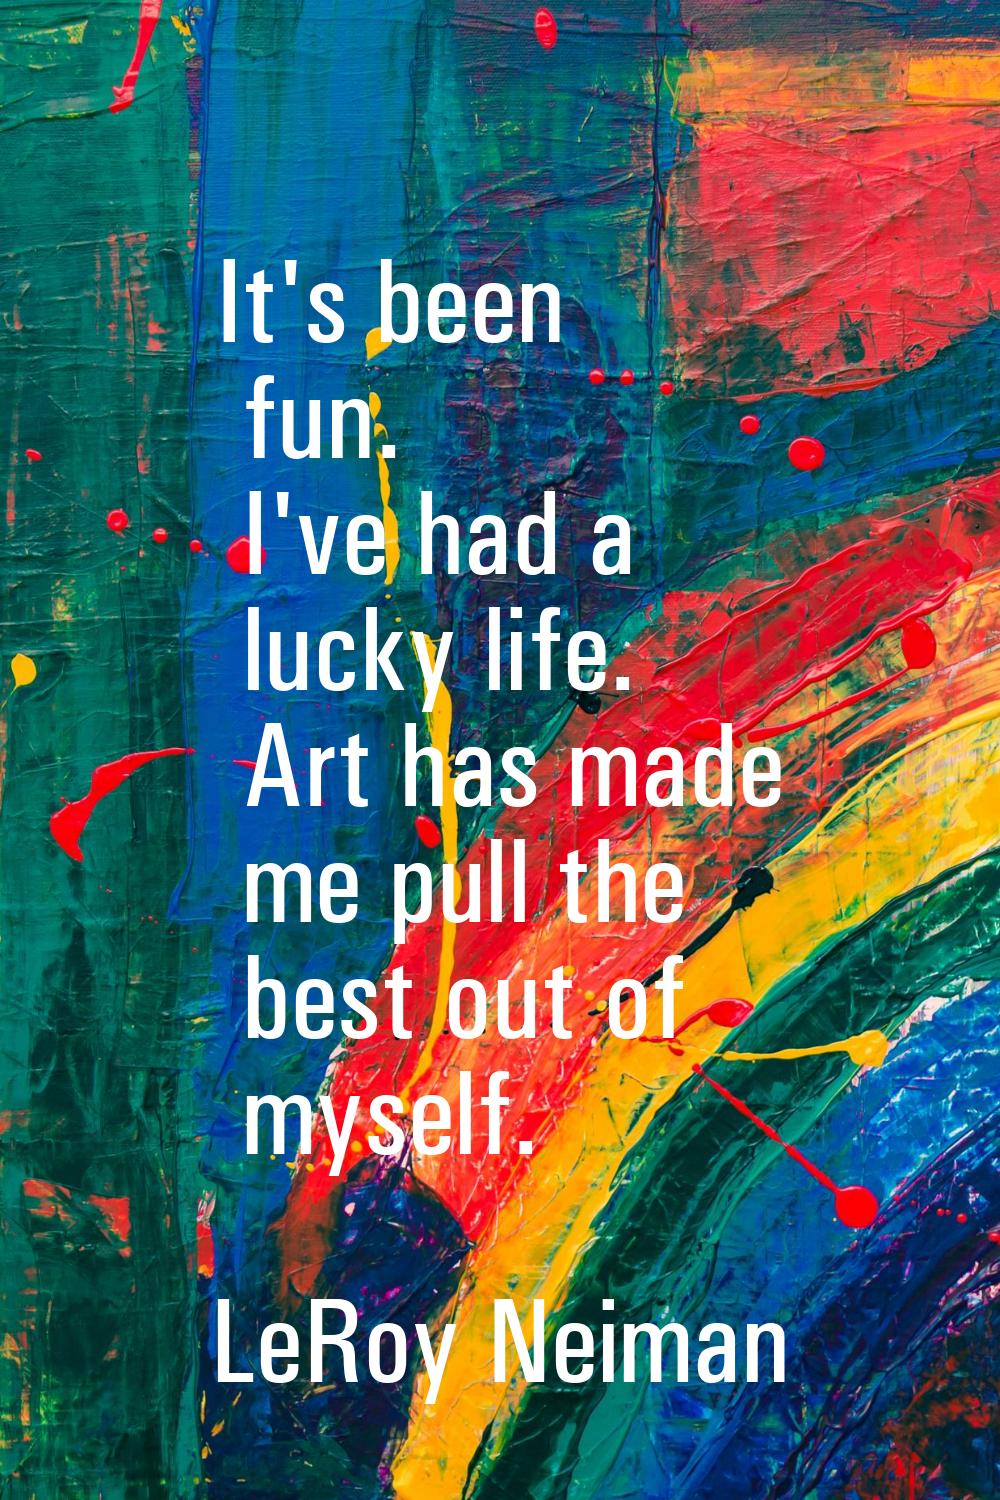 It's been fun. I've had a lucky life. Art has made me pull the best out of myself.